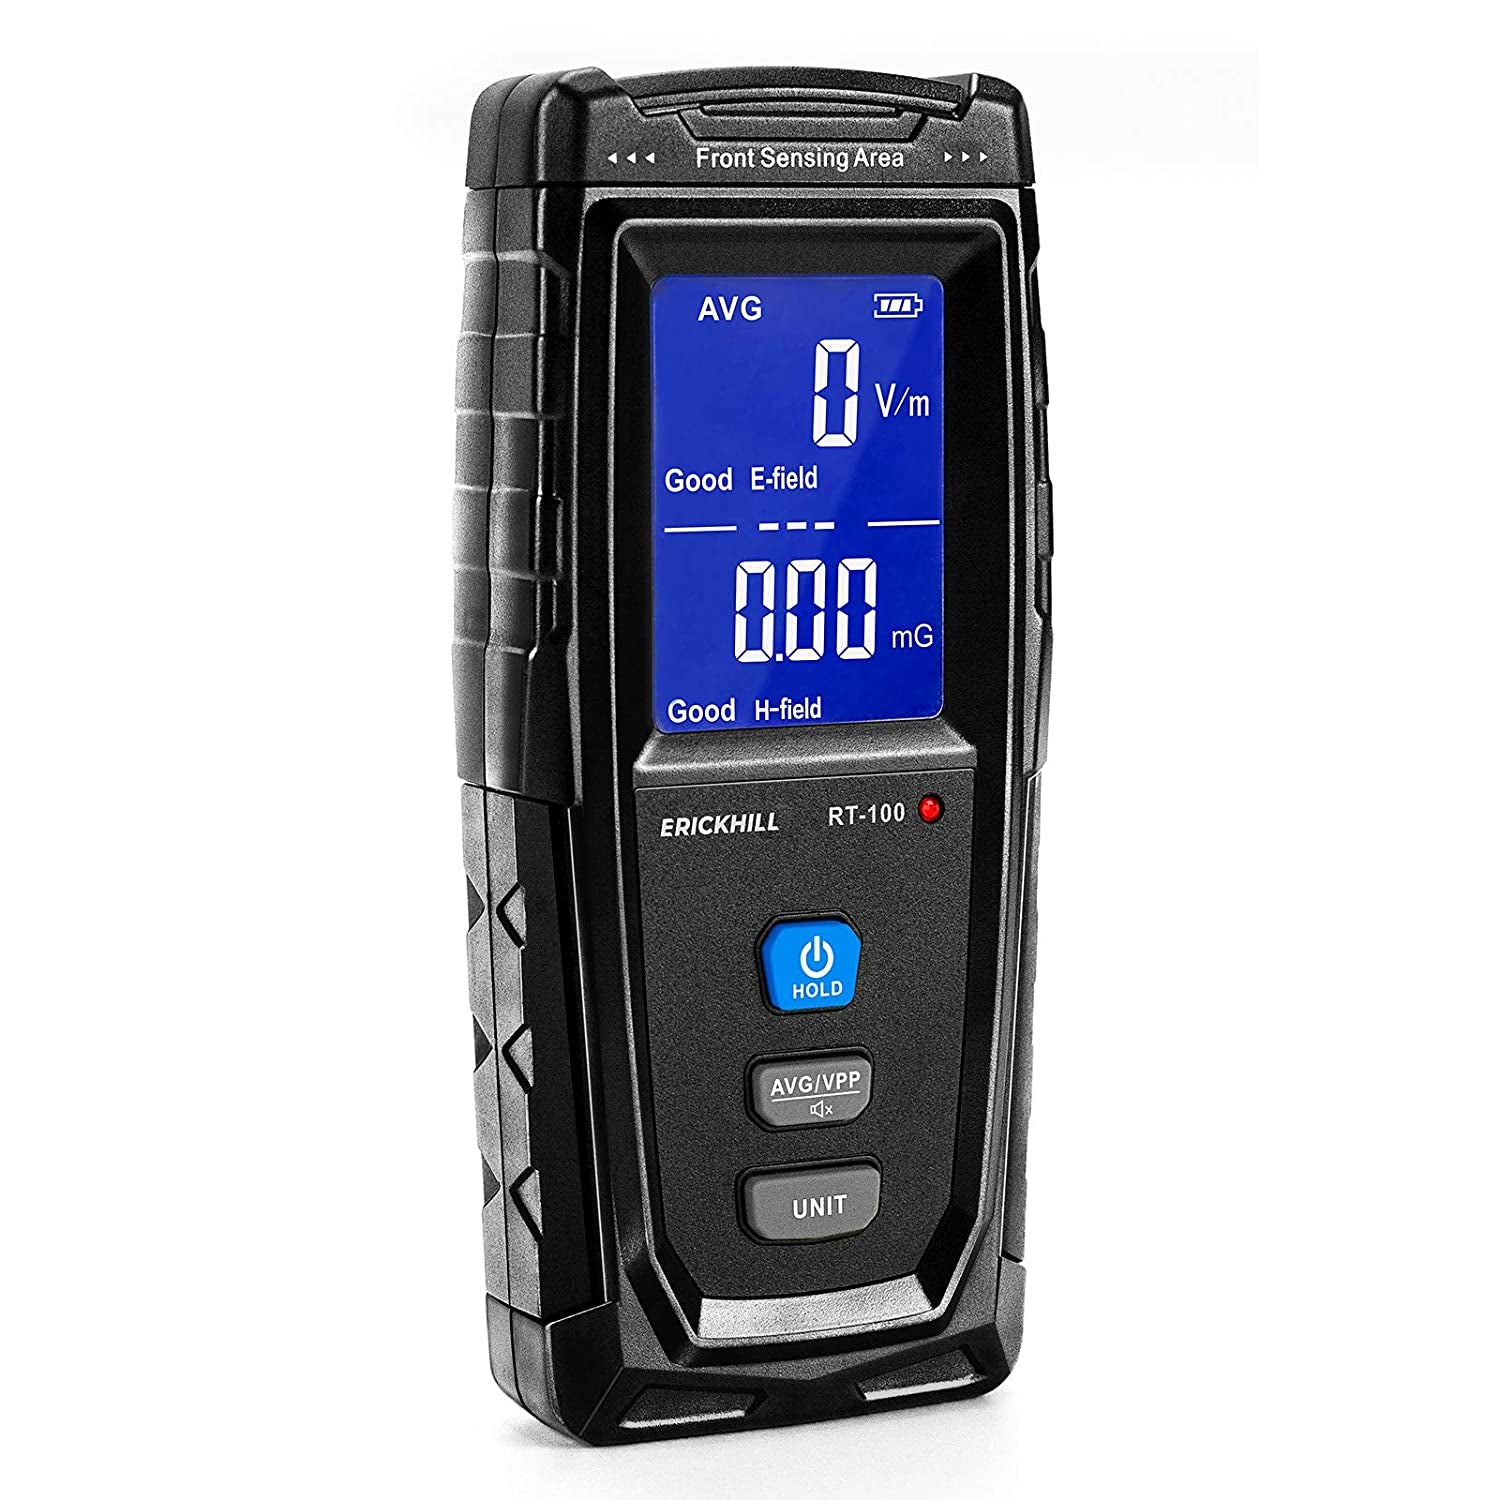 Rechargeable EMF Meter - Hand-Held Digital Electromagnetic Field Radiation Detector with LCD Display - Ideal for Home EMF inspections, Office Use, Outdoors, and Paranormal Investigations